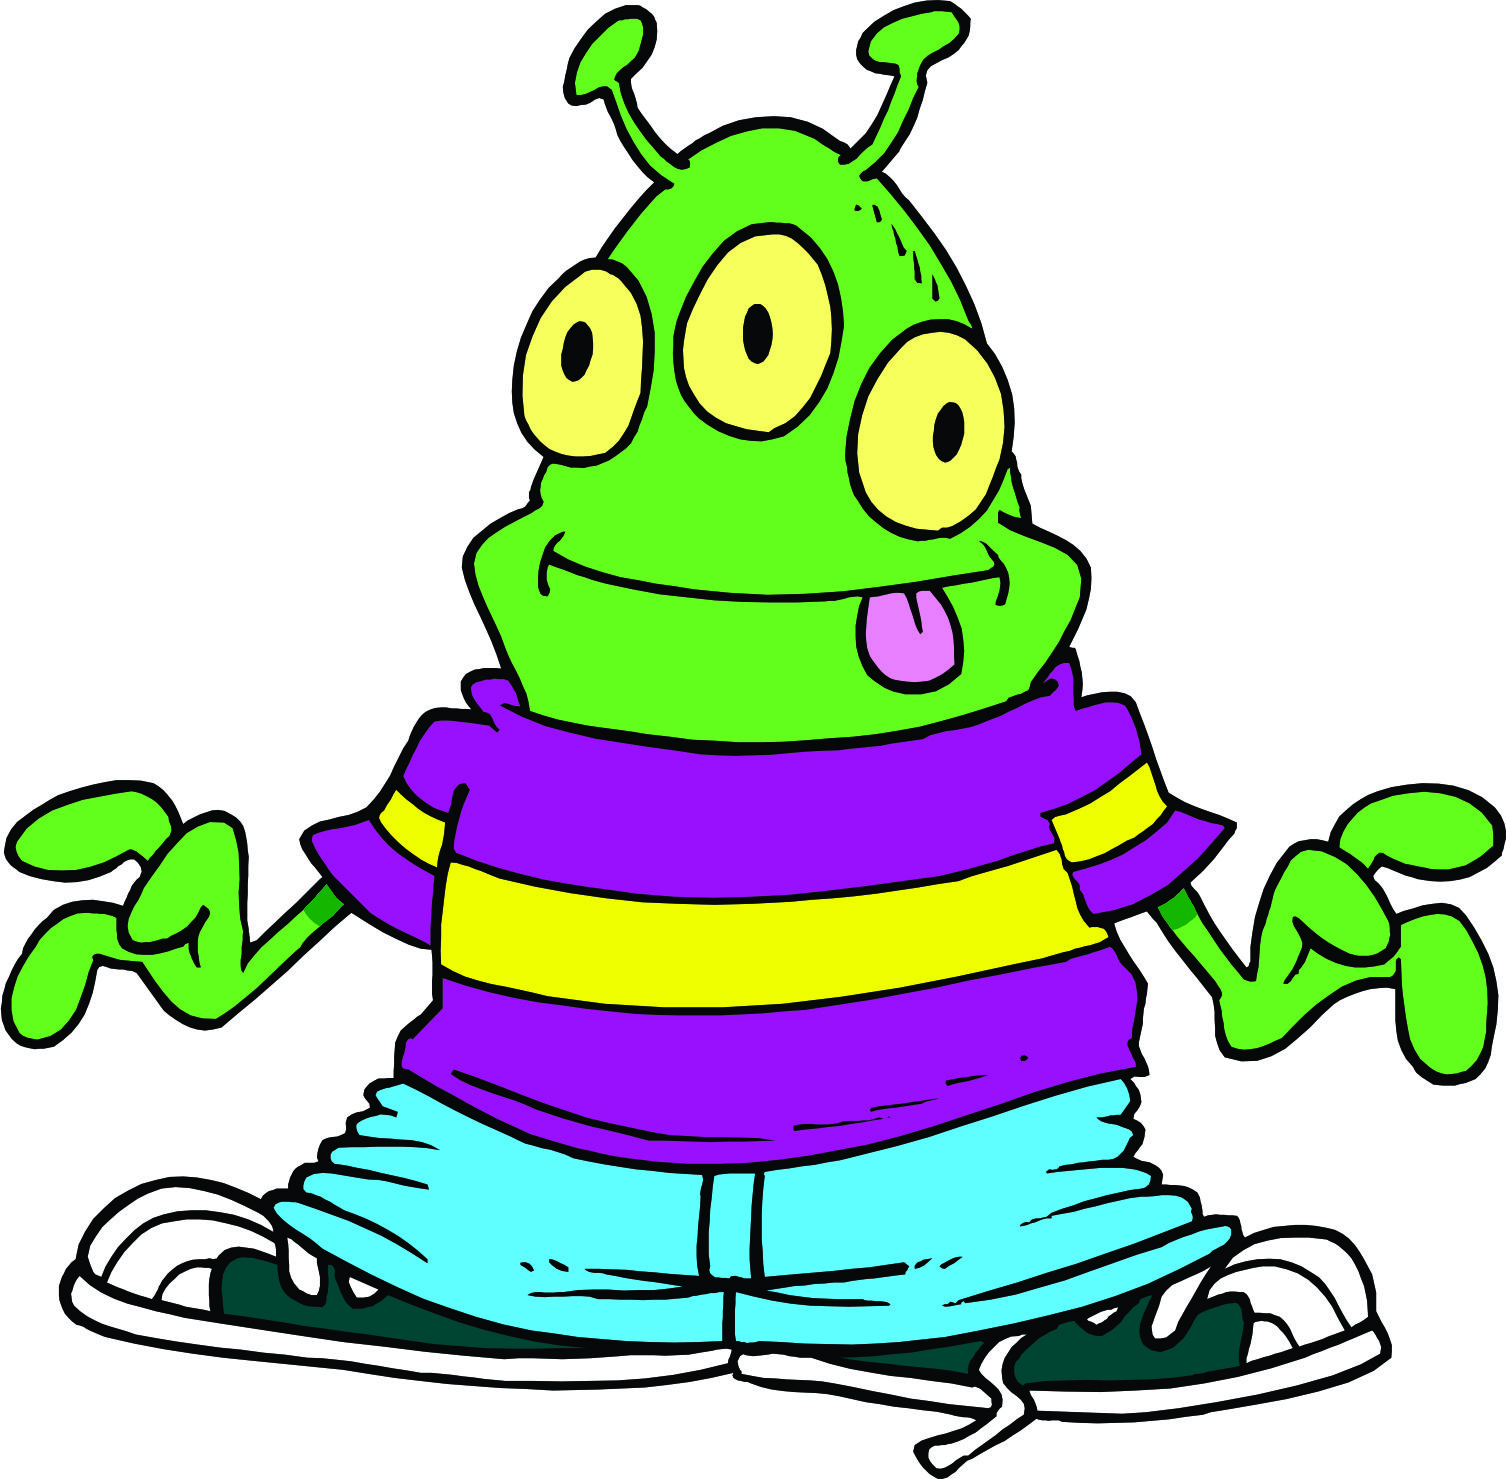 Cartoon Alien Images - Clipart library